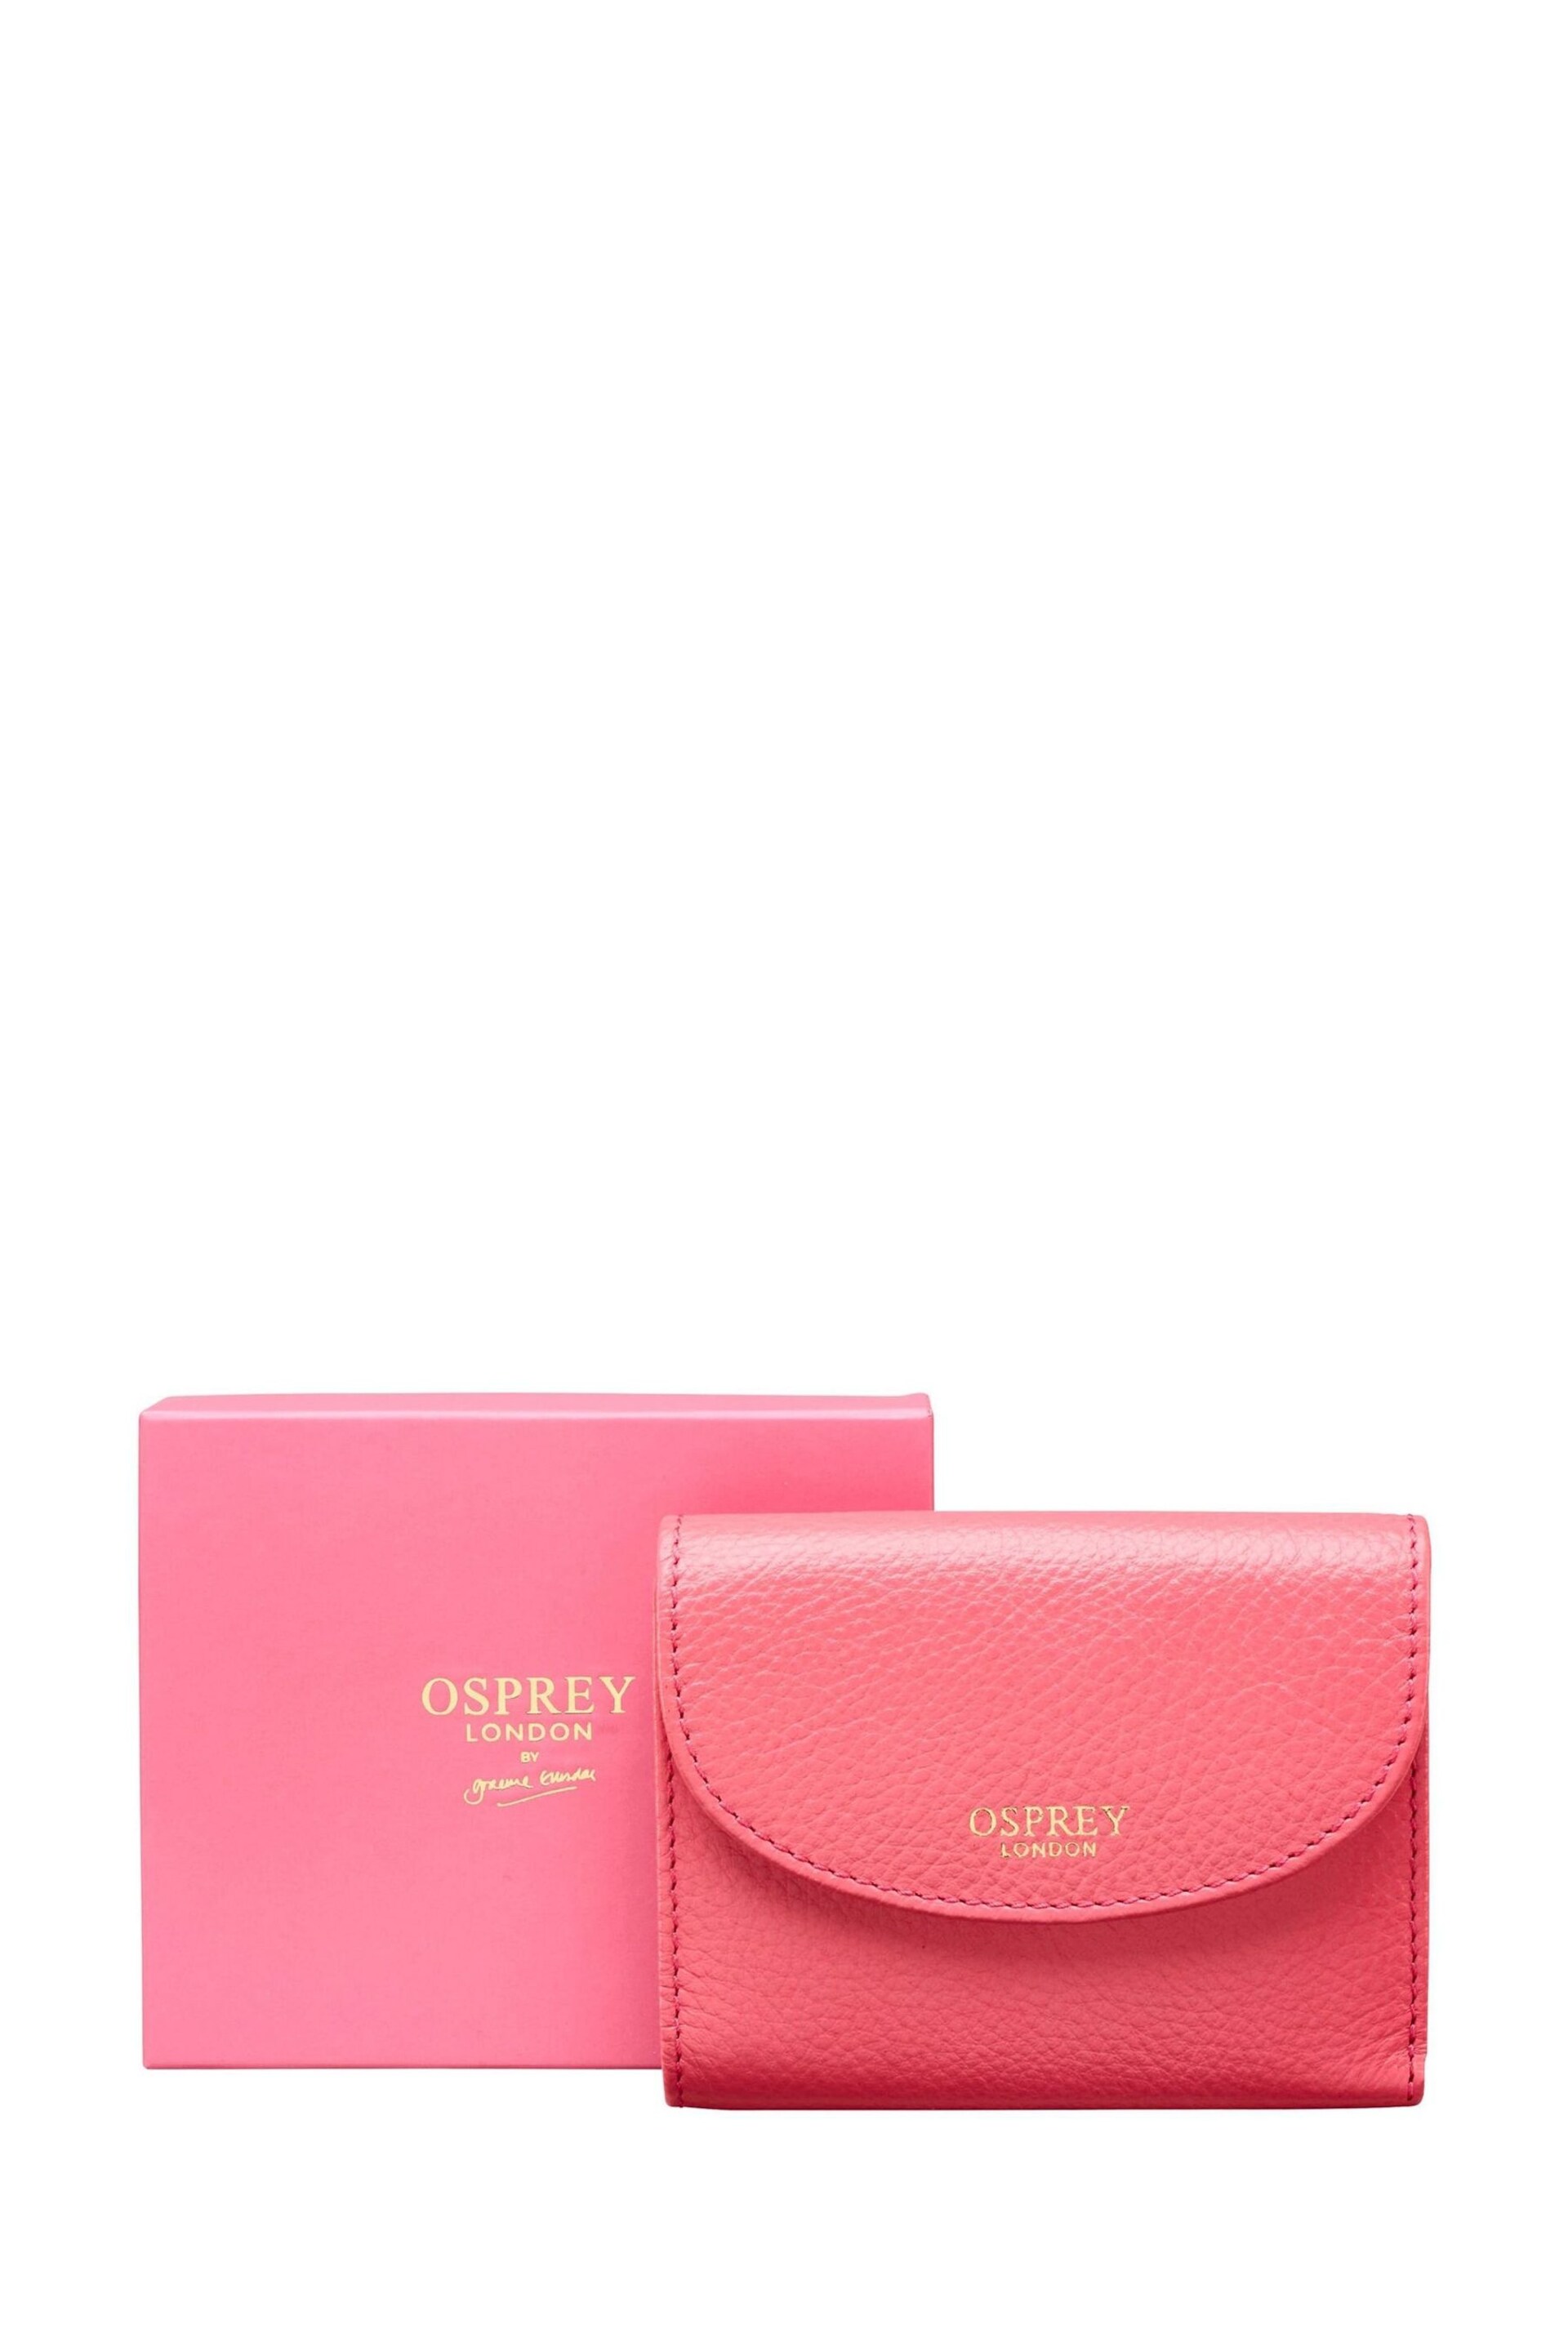 OSPREY LONDON The Tilly Leather Purse Gift Set - Image 1 of 9